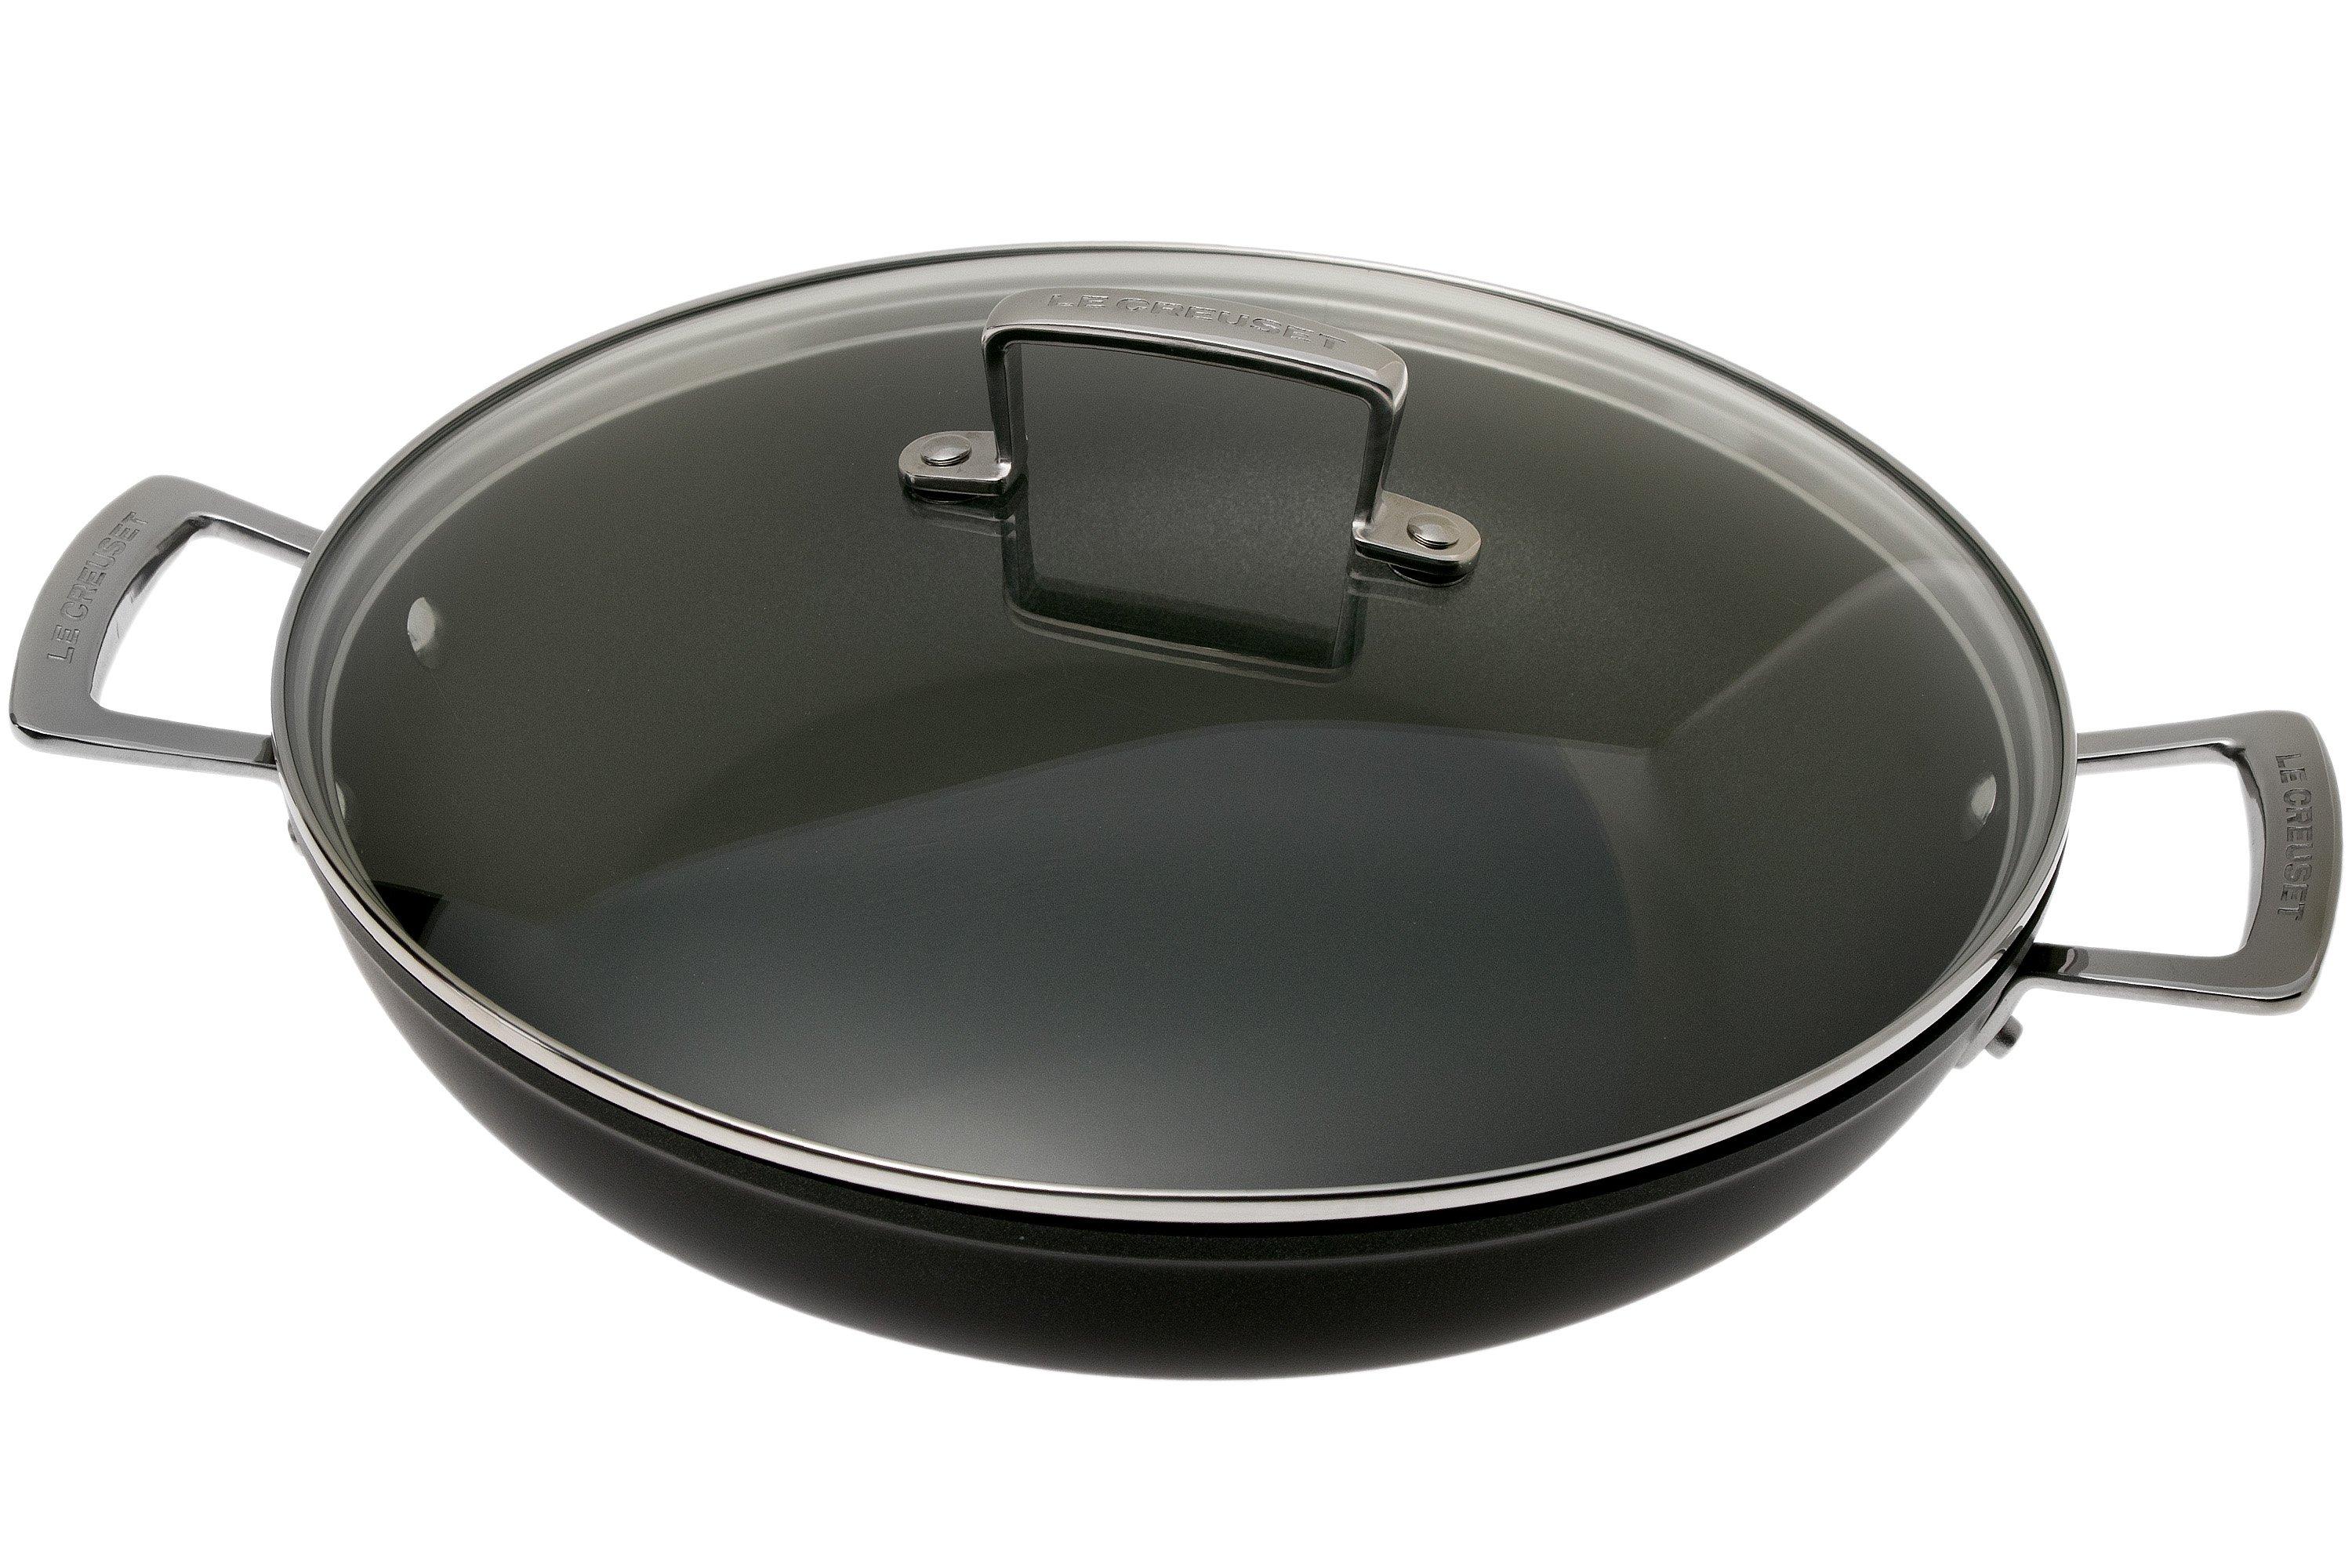 Attent zoon Hick Le Creuset TNS Provence saute pan with lid 30 cm | Advantageously shopping  at Knivesandtools.com